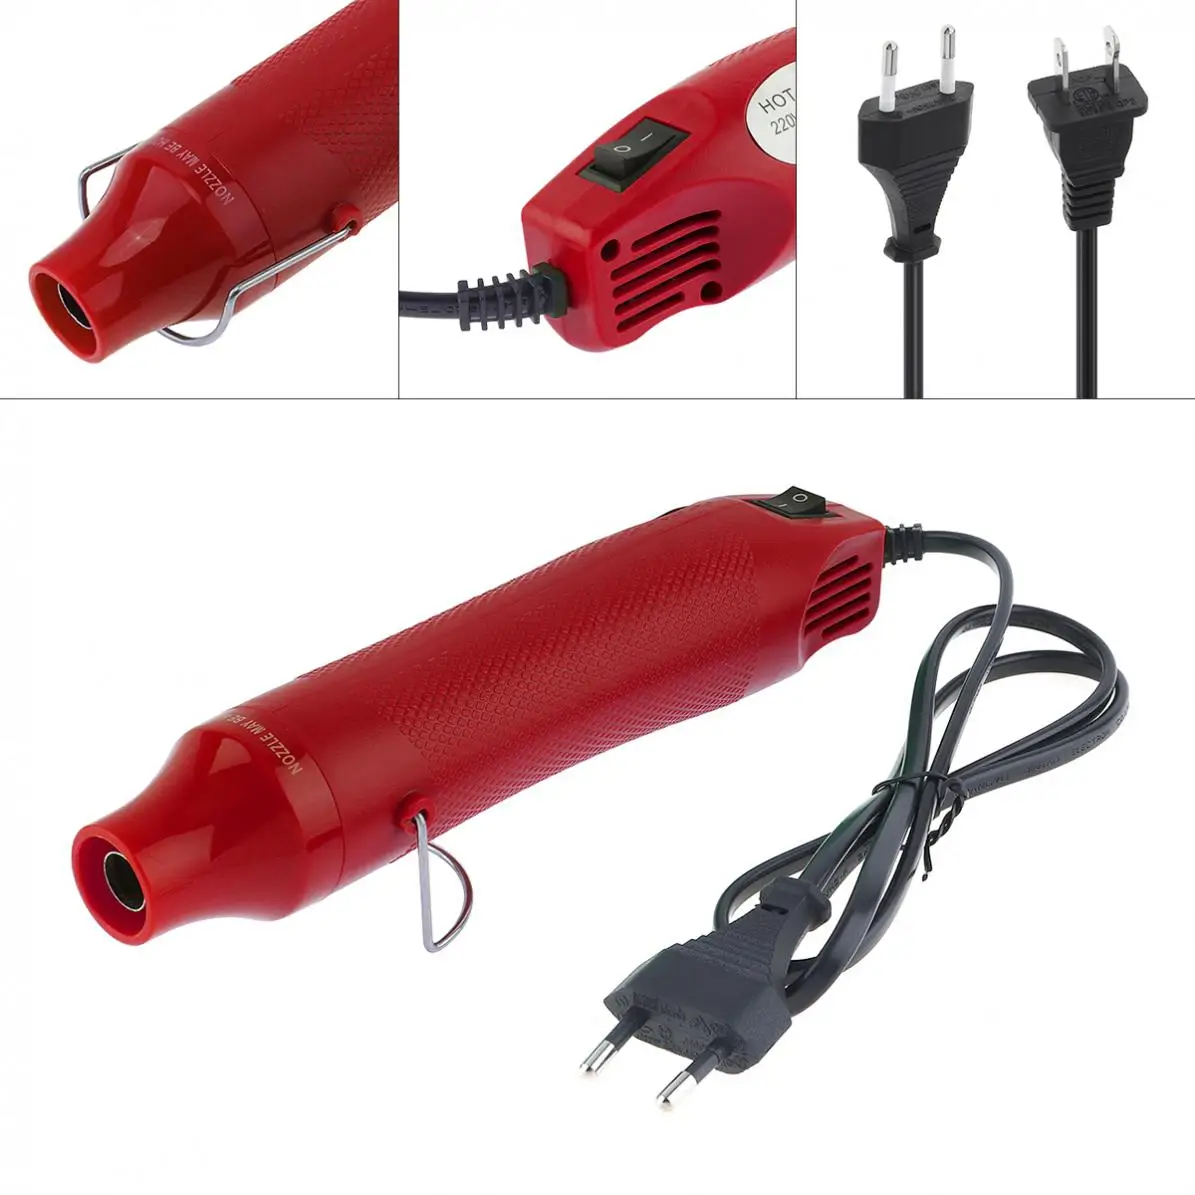 110V / 220V 300W Heat Gun Hot Air Electric Blower with Shrink Plastic Surface EU US Plug for Heating DIY Accessories 150x100mm 300w 120v universal flexible silicone heater pad element engine oil pan heat chafer heater electric heating stampante